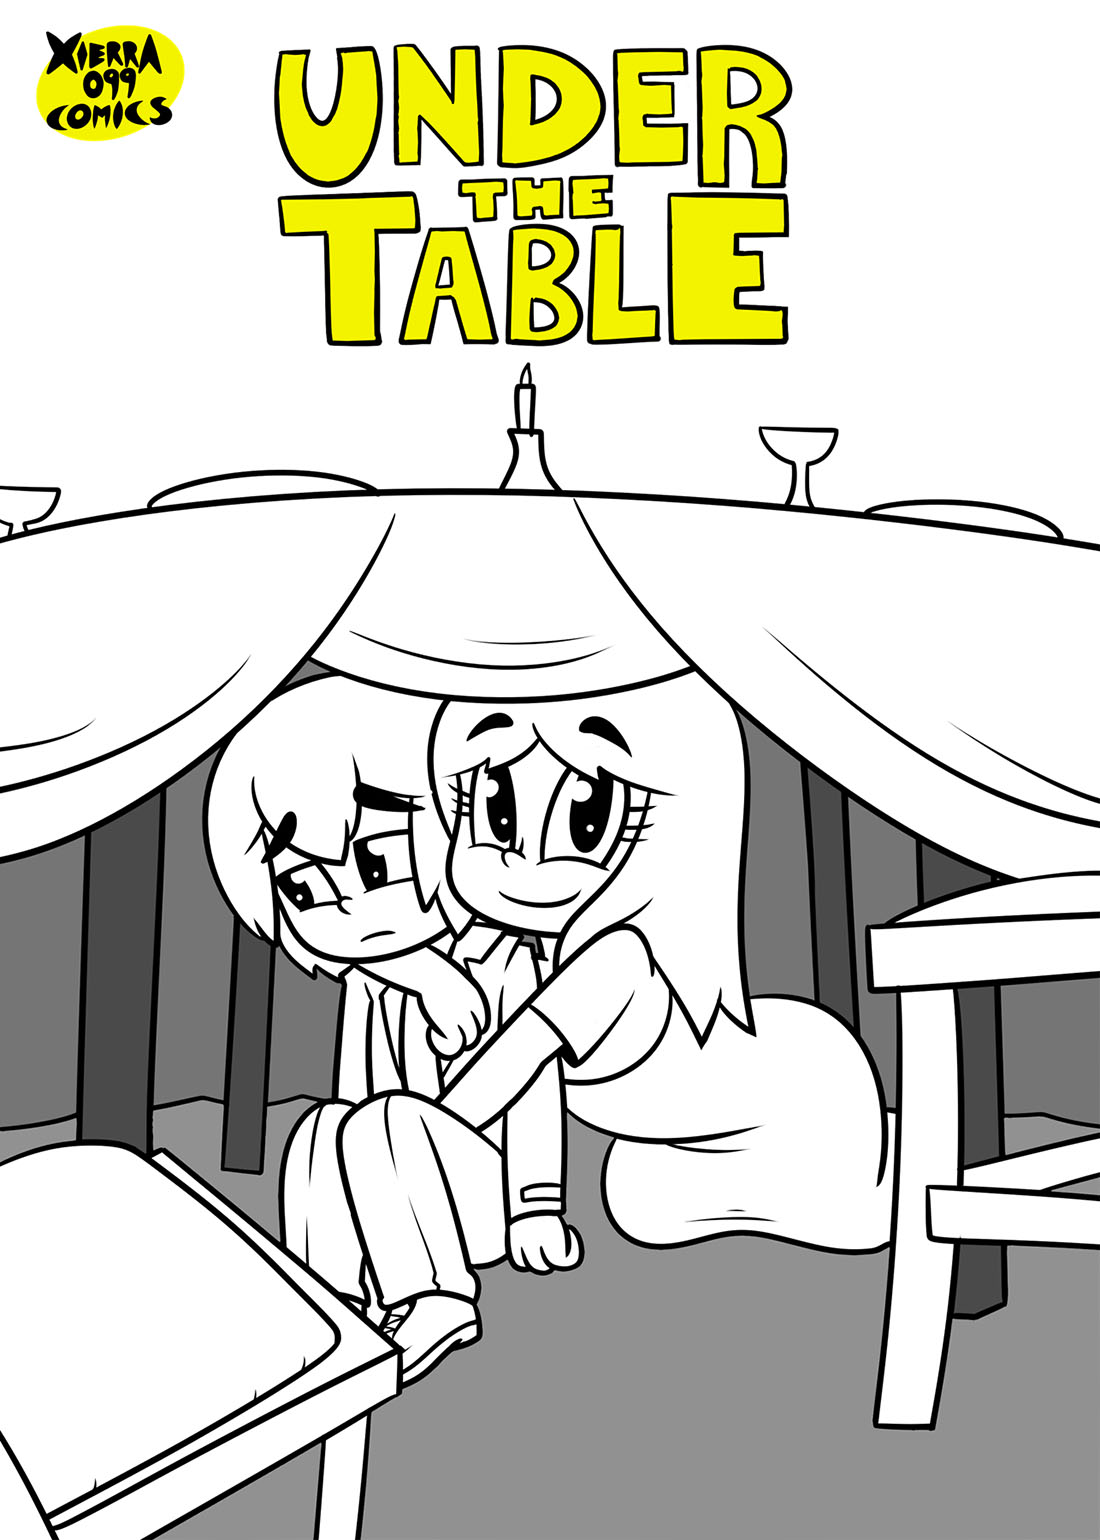 UNDER the Table